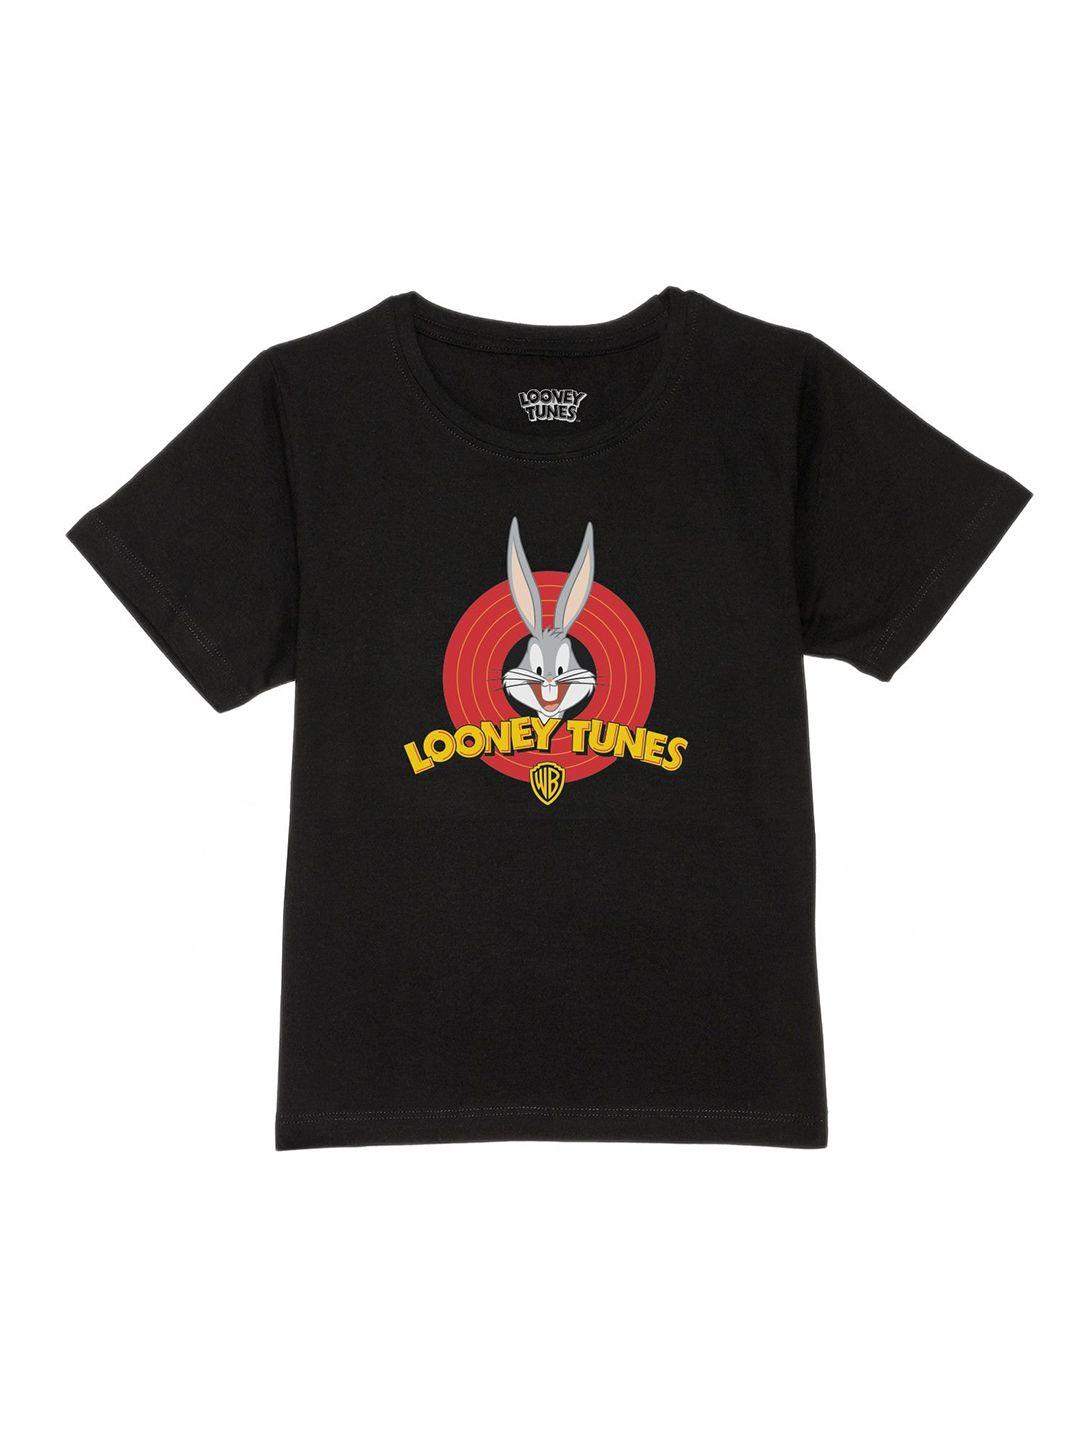 looney tunes by wear your mind boys black pure cotton printed t-shirt